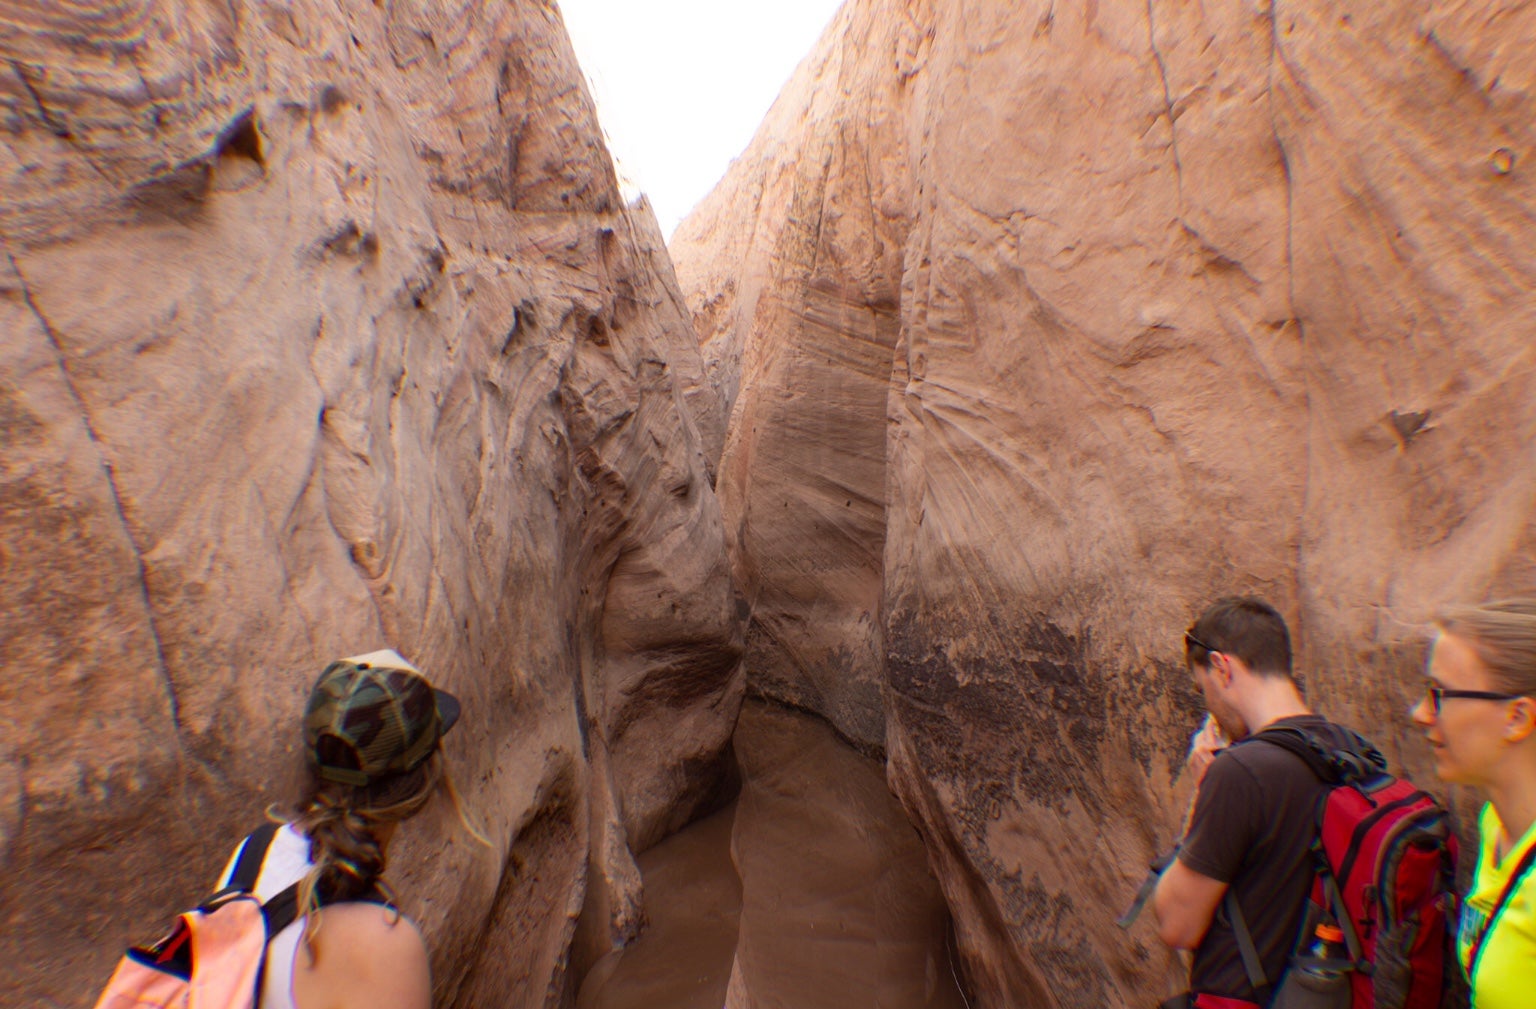 The beginning of Zebra Slot Canyon - people deciding whether to get their feet wet or turn around. 